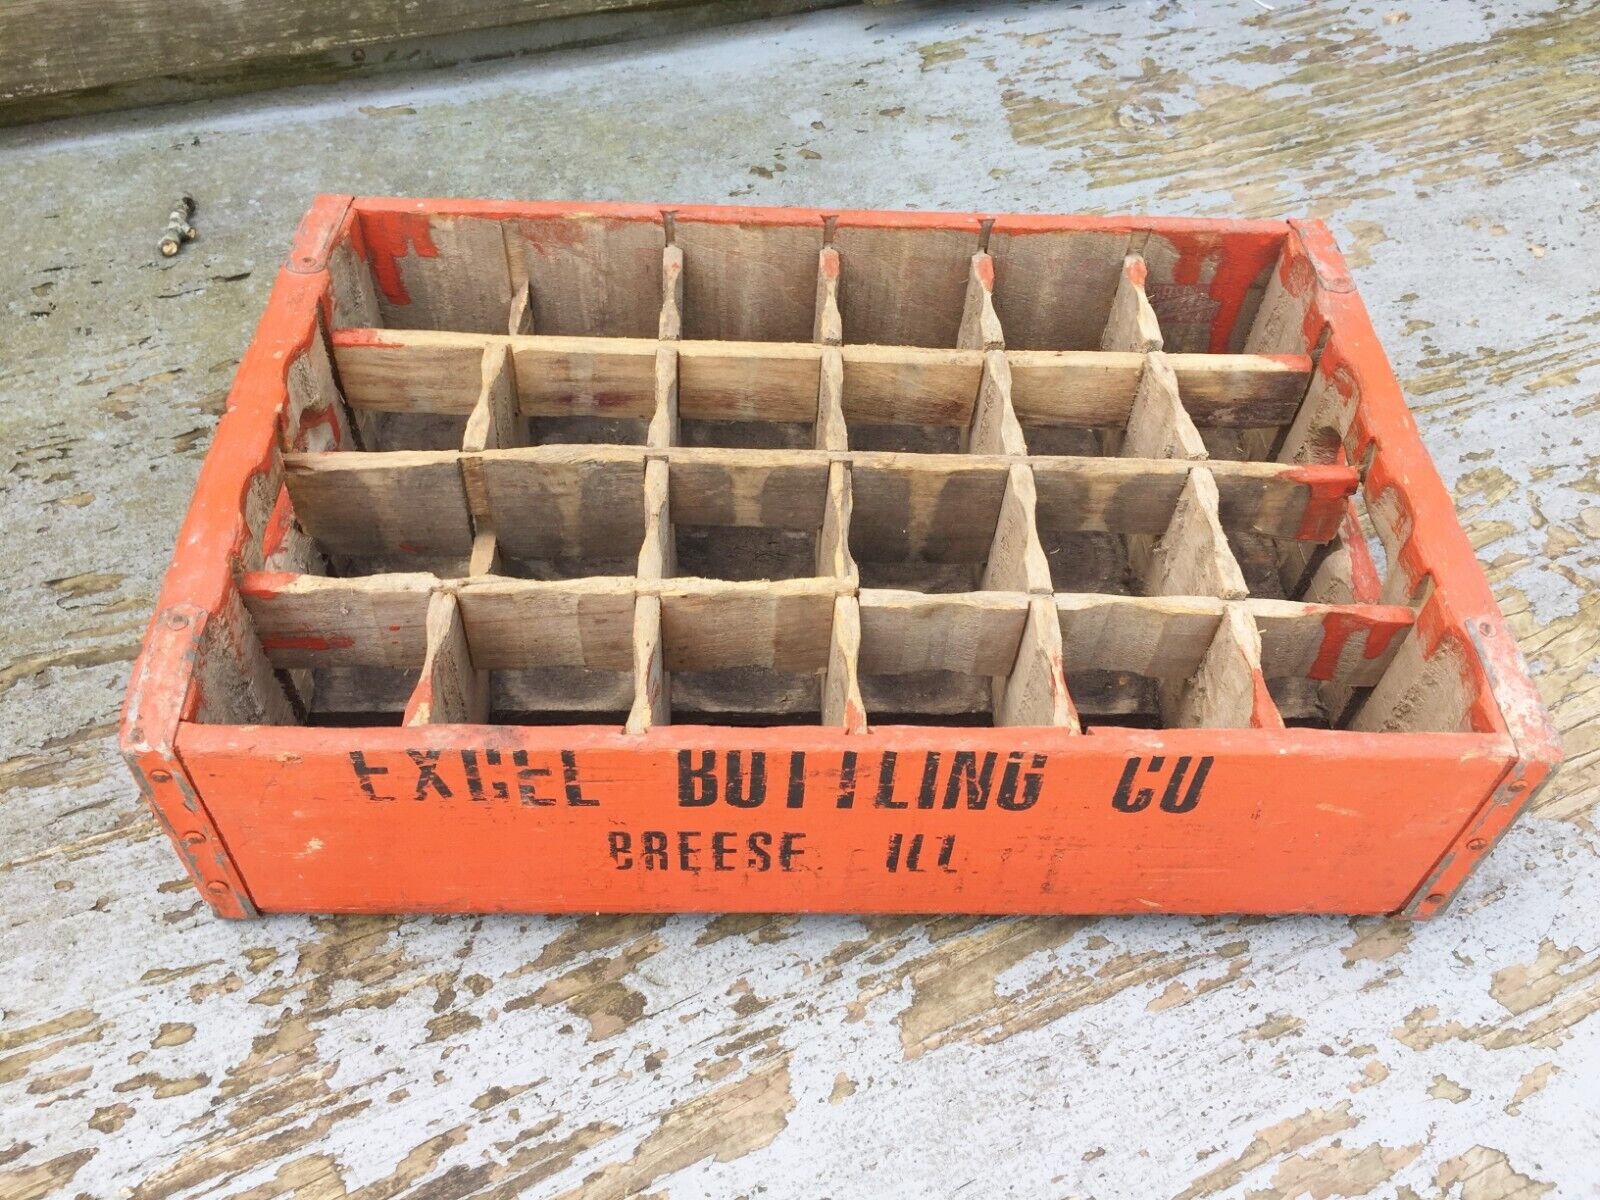 Wood Excel Soda Crate Breese IL Illinois for 24 Bottle Ski Life Beer Bottling Co